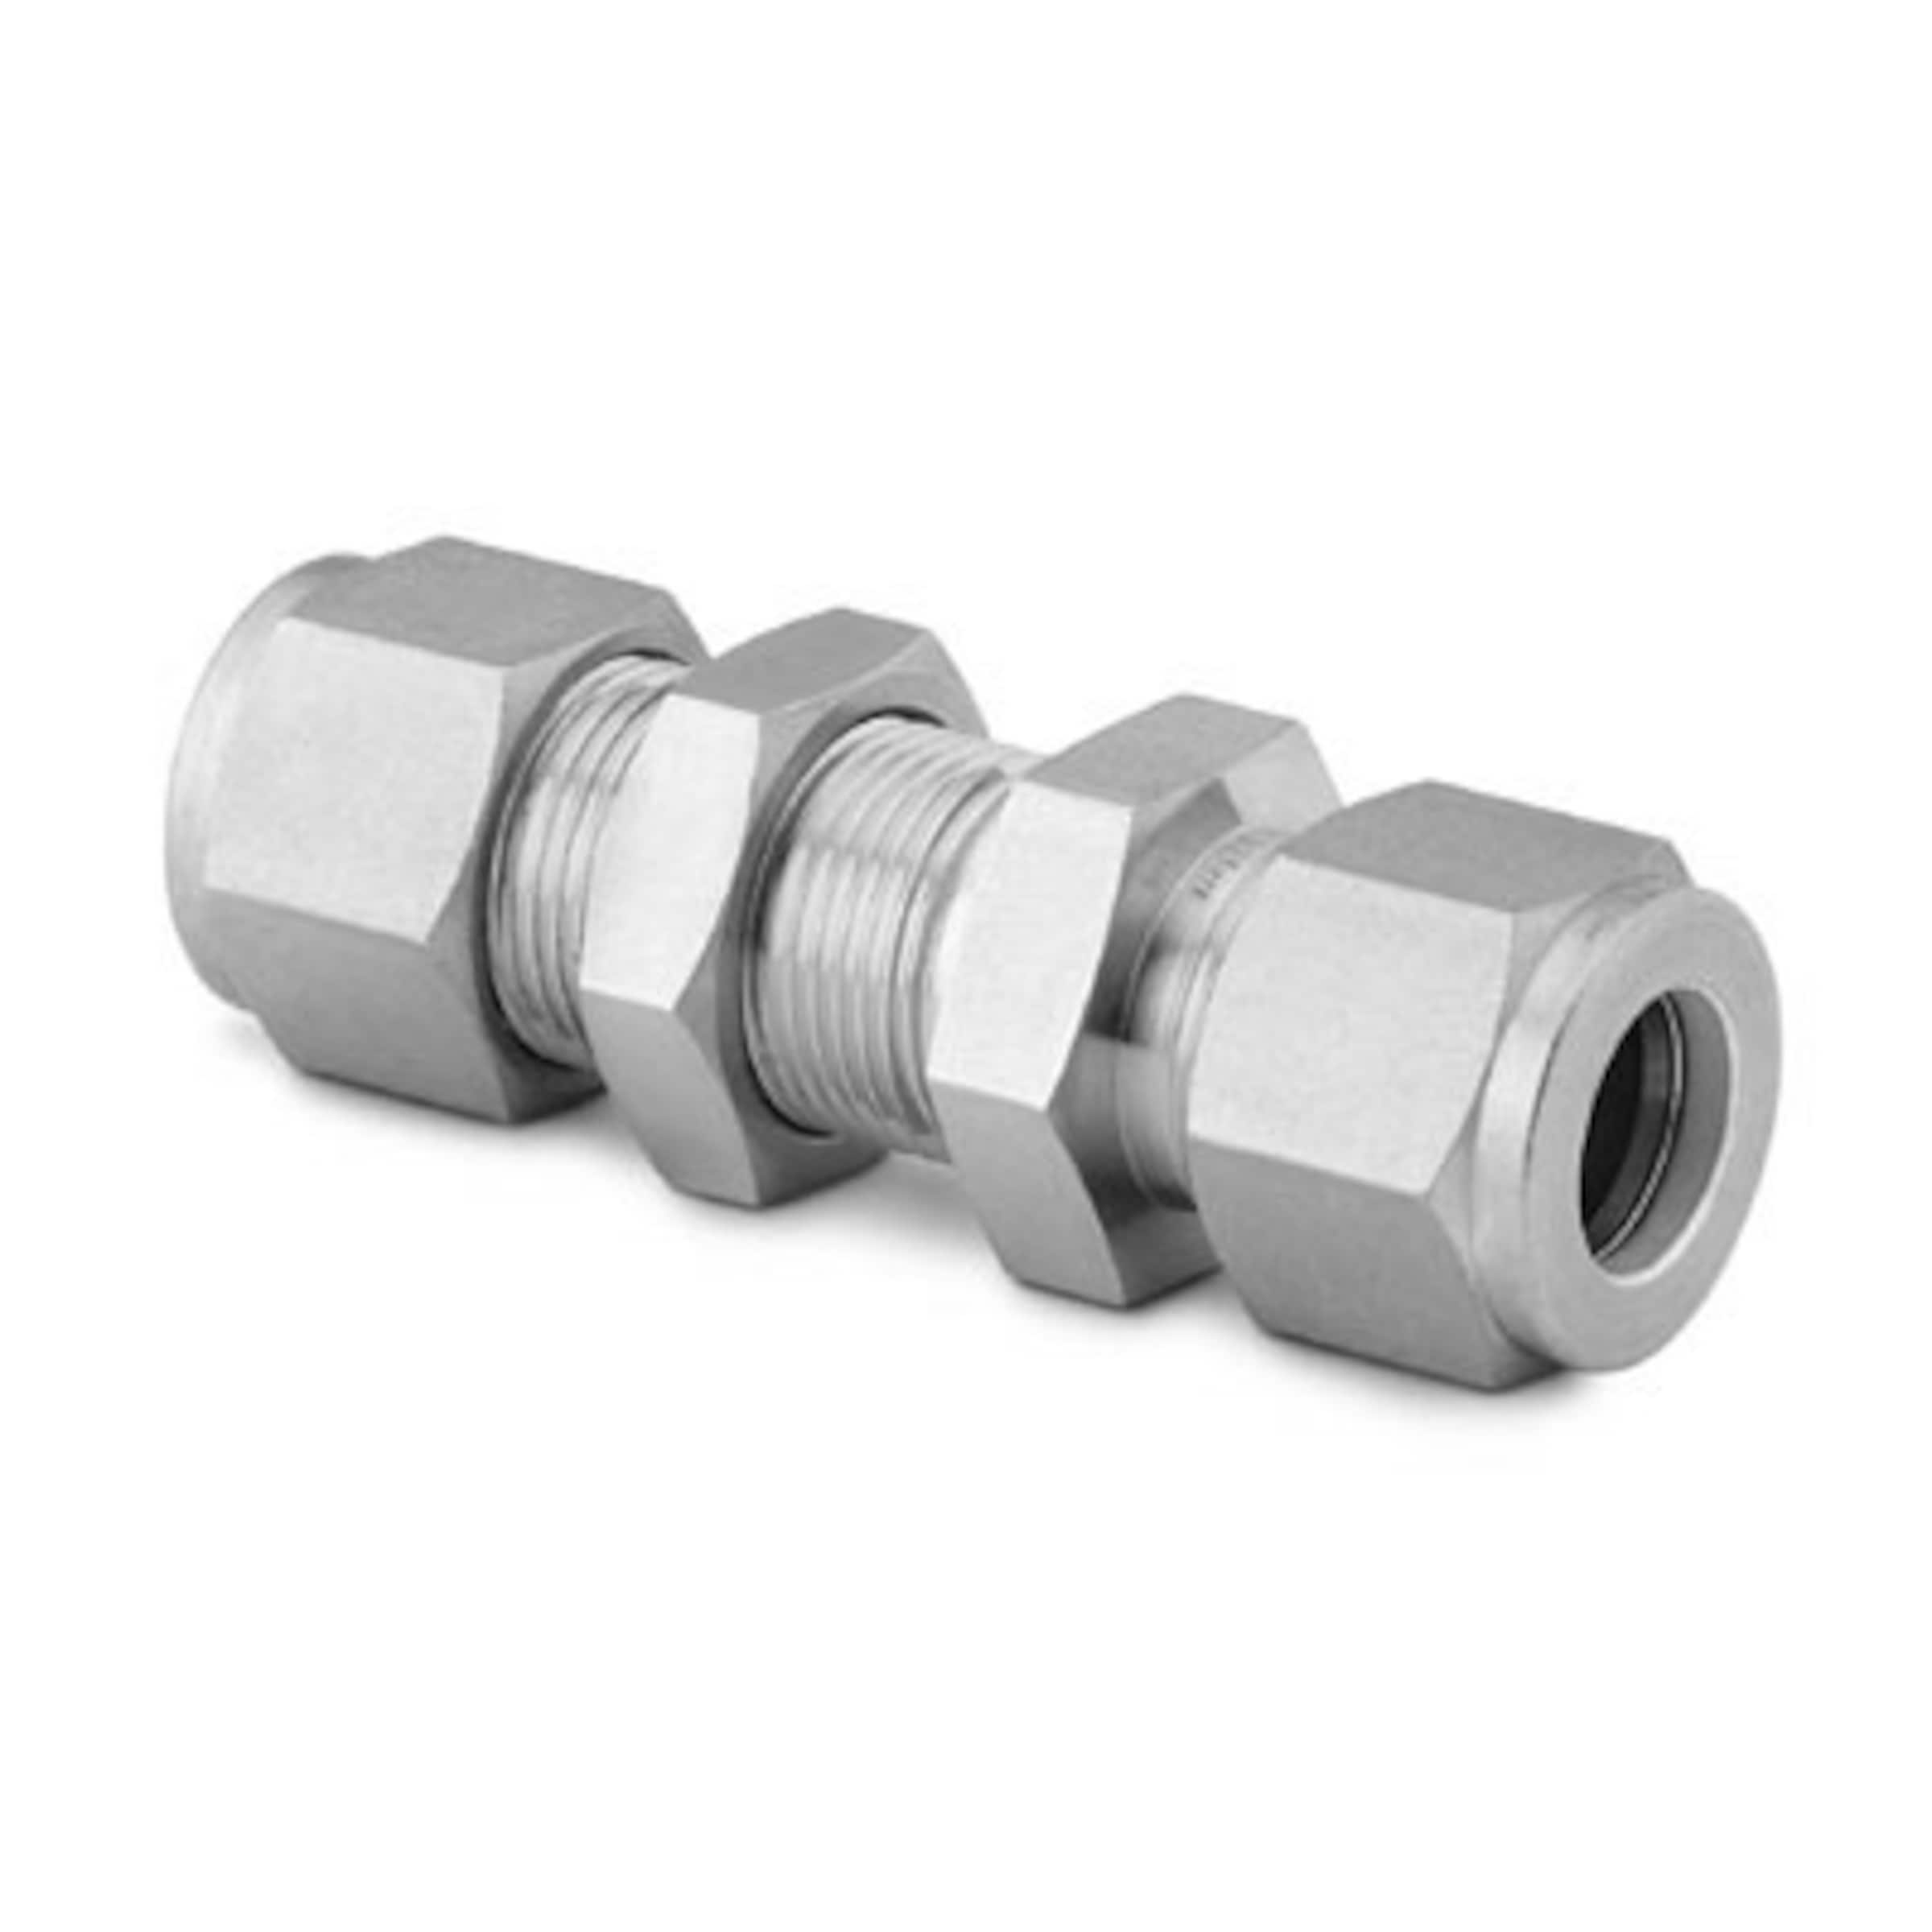 Tube Fittings And Adapters Fittings Swagelok